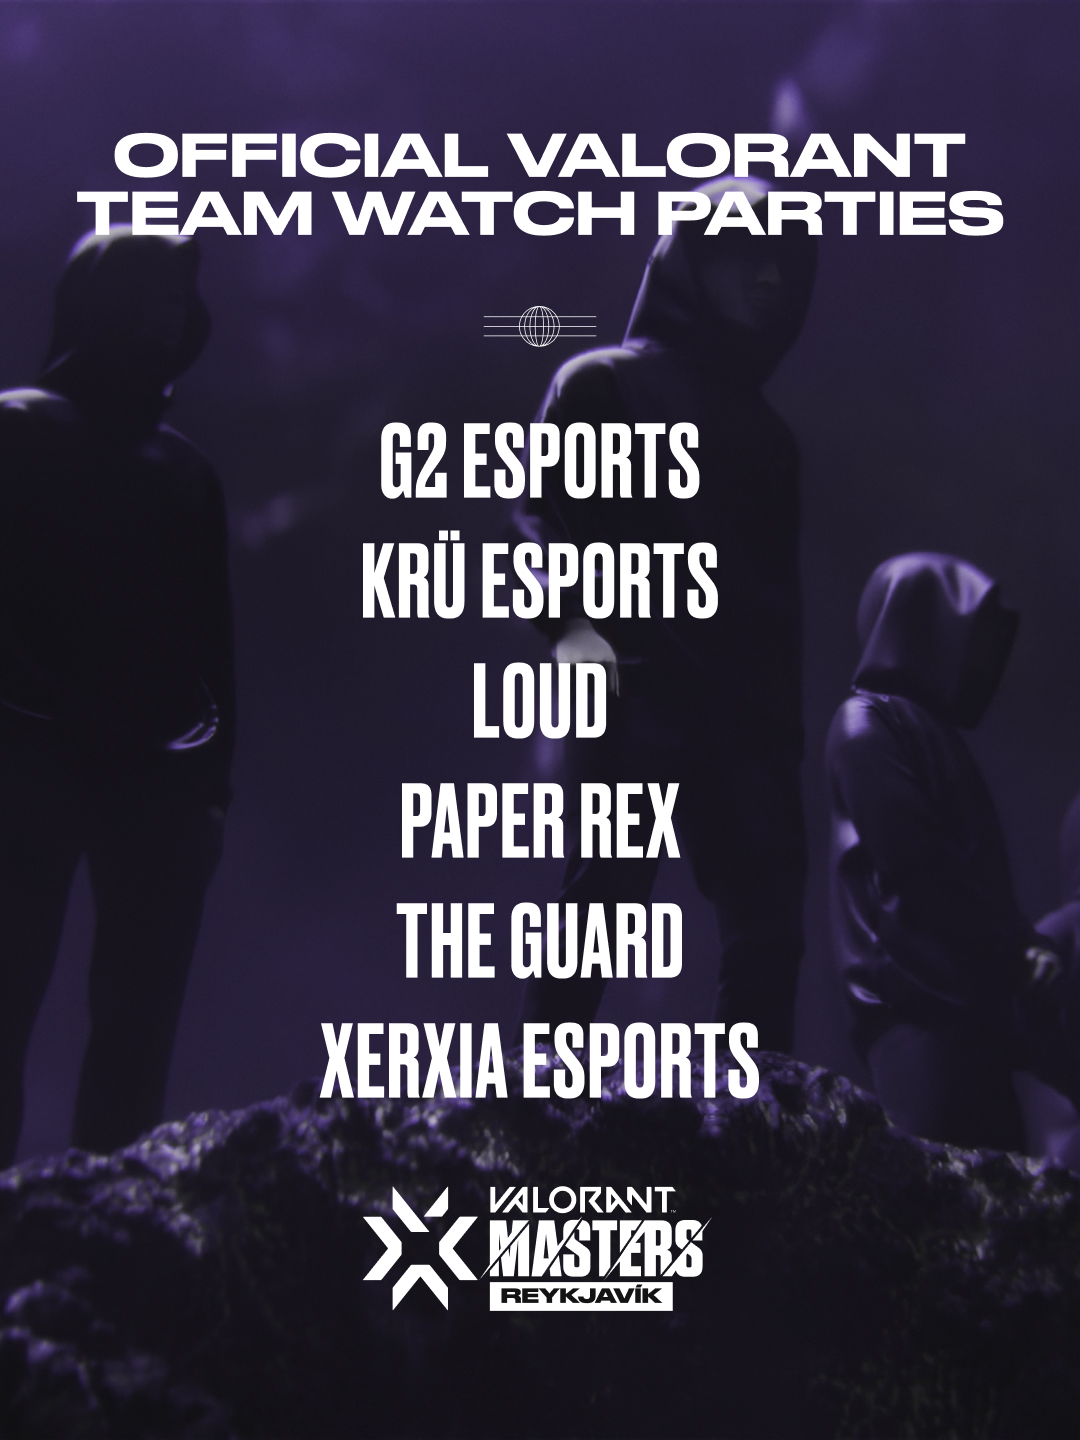 FPX on X: To celebrate our first Champion at #Valorantmasters, we're  hosting a great event to thank all the incredible fans! Join our   on 6th Aug at 2PM CEST for a